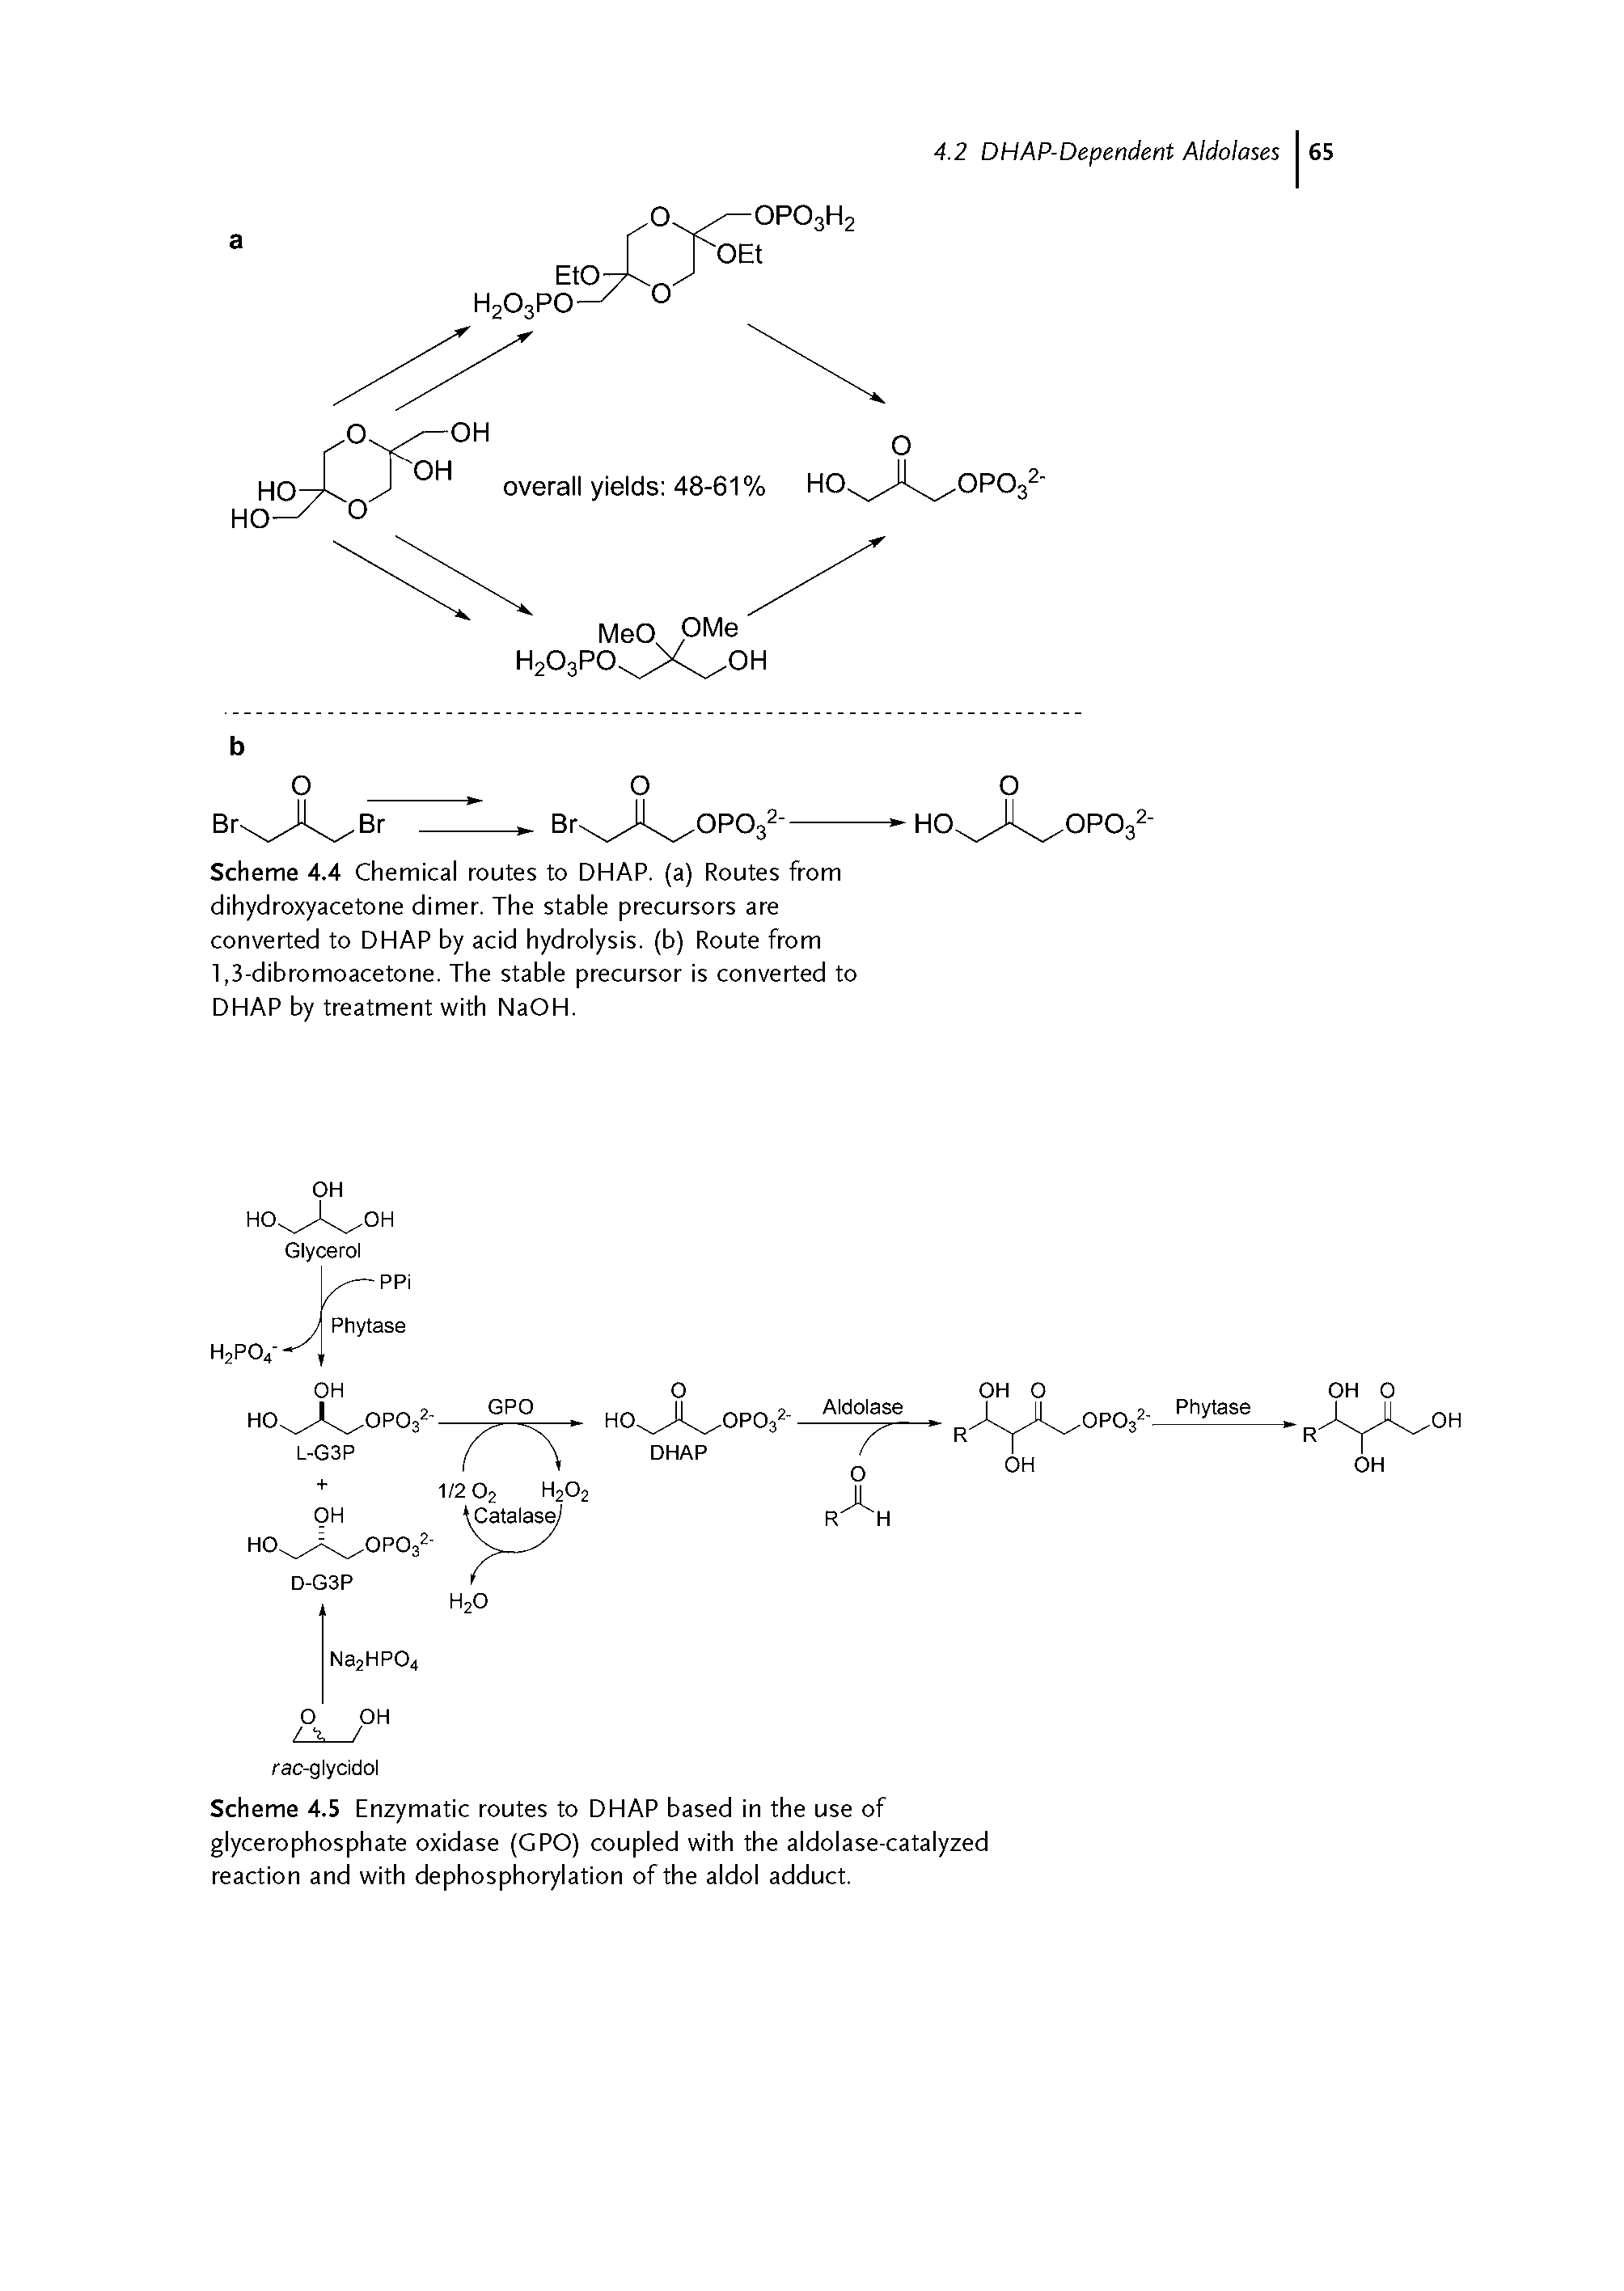 Scheme 4.4 Chemical routes to DHAP. (a) Routes from dihydroxyacetone dimer. The stable precursors are converted to DHAP by acid hydrolysis, (b) Route from 1,3-dibromoacetone. The stable precursor is converted to DHAP by treatment with NaOH.